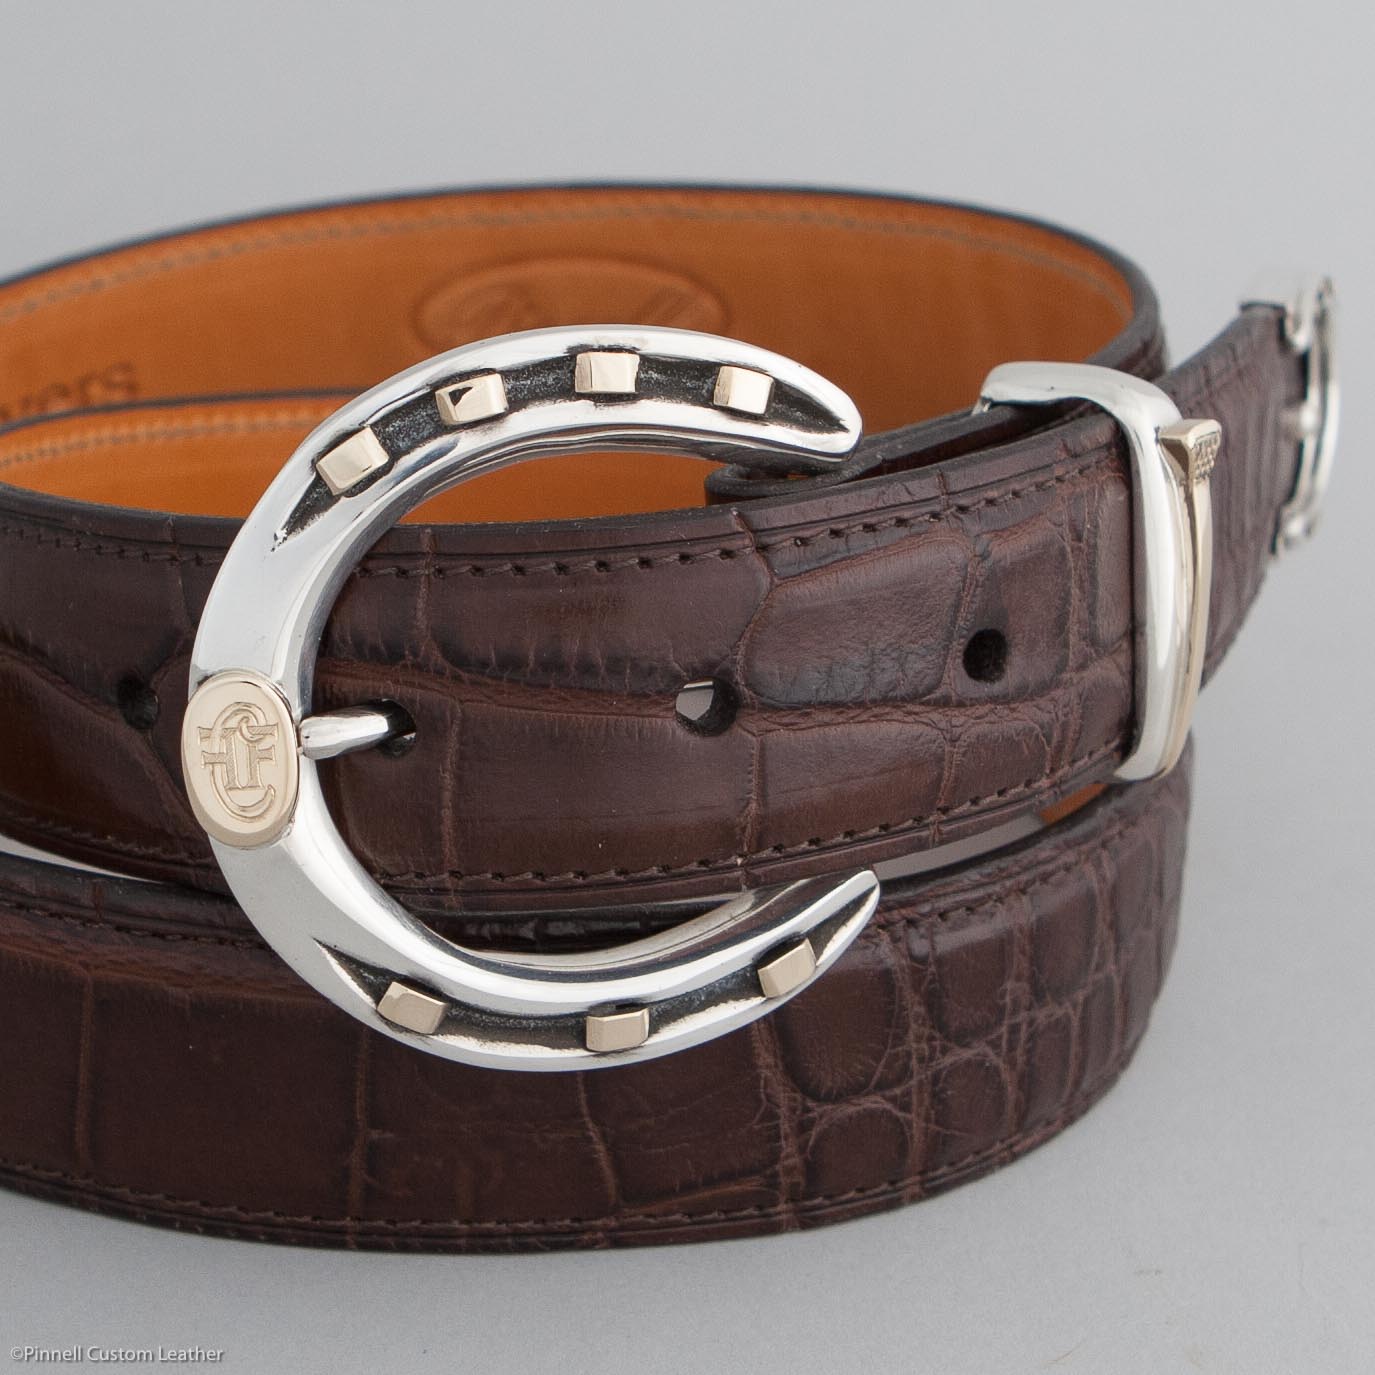 Buckles Equestrian — Pinnell Custom Leather